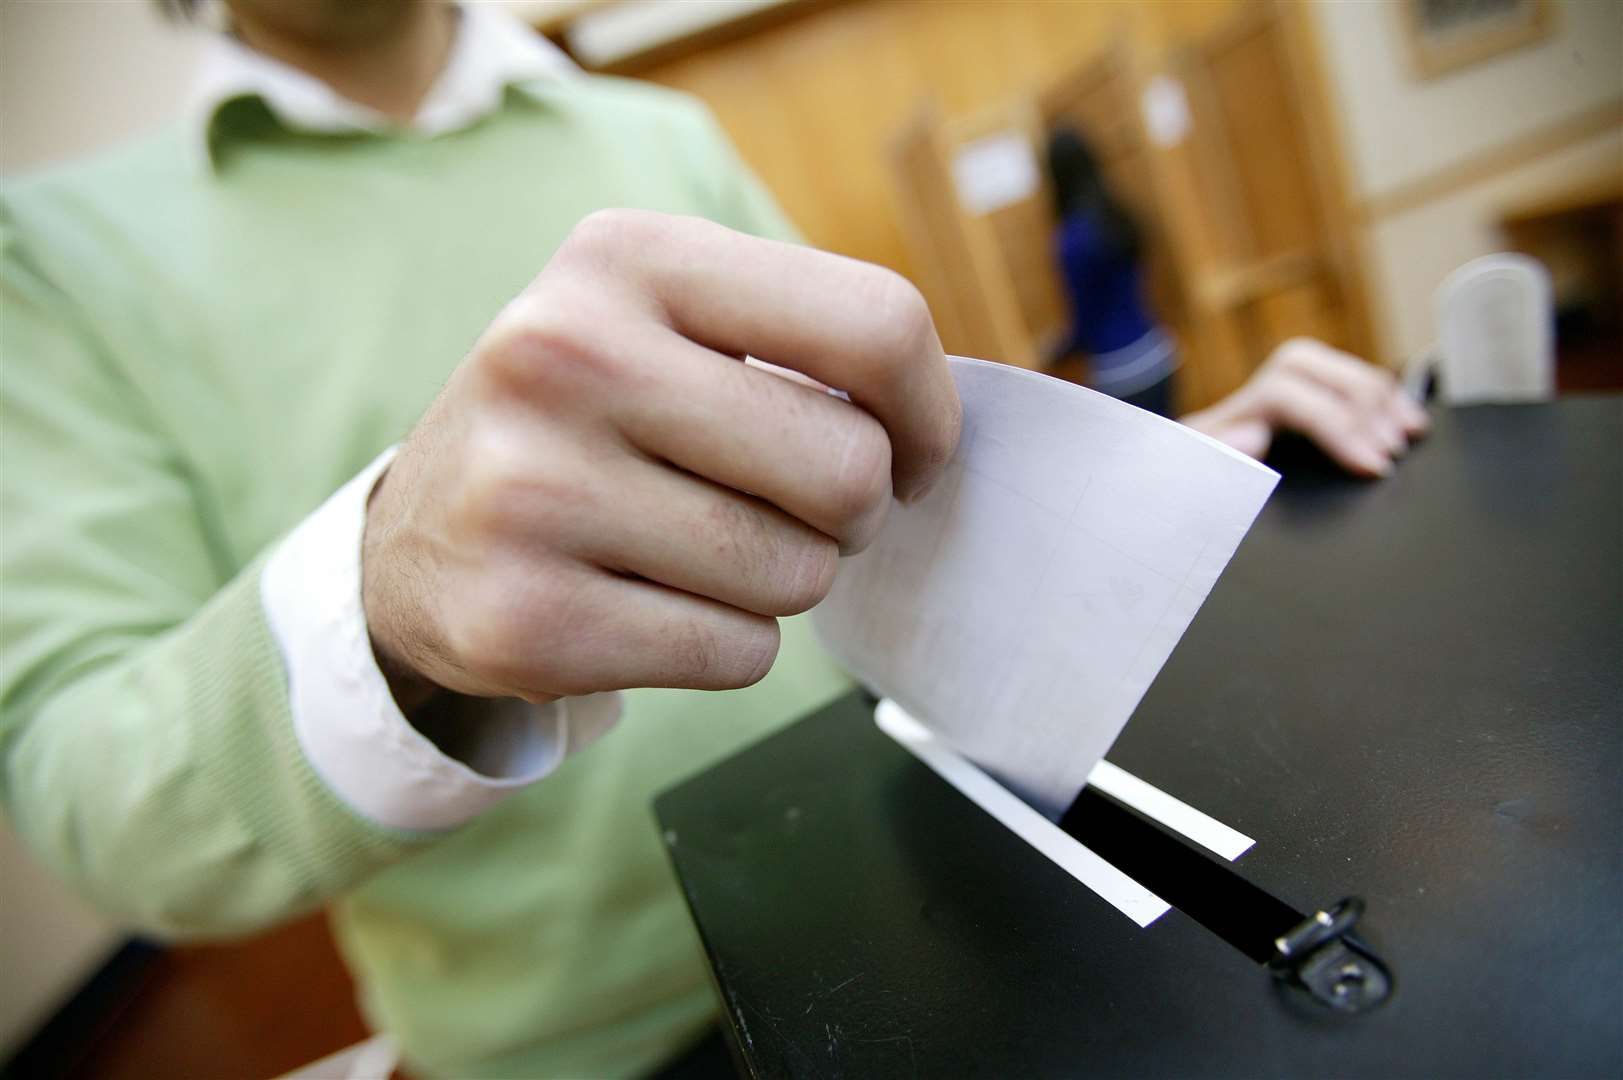 People have been warned to register to vote ahead of the Monday deadline.